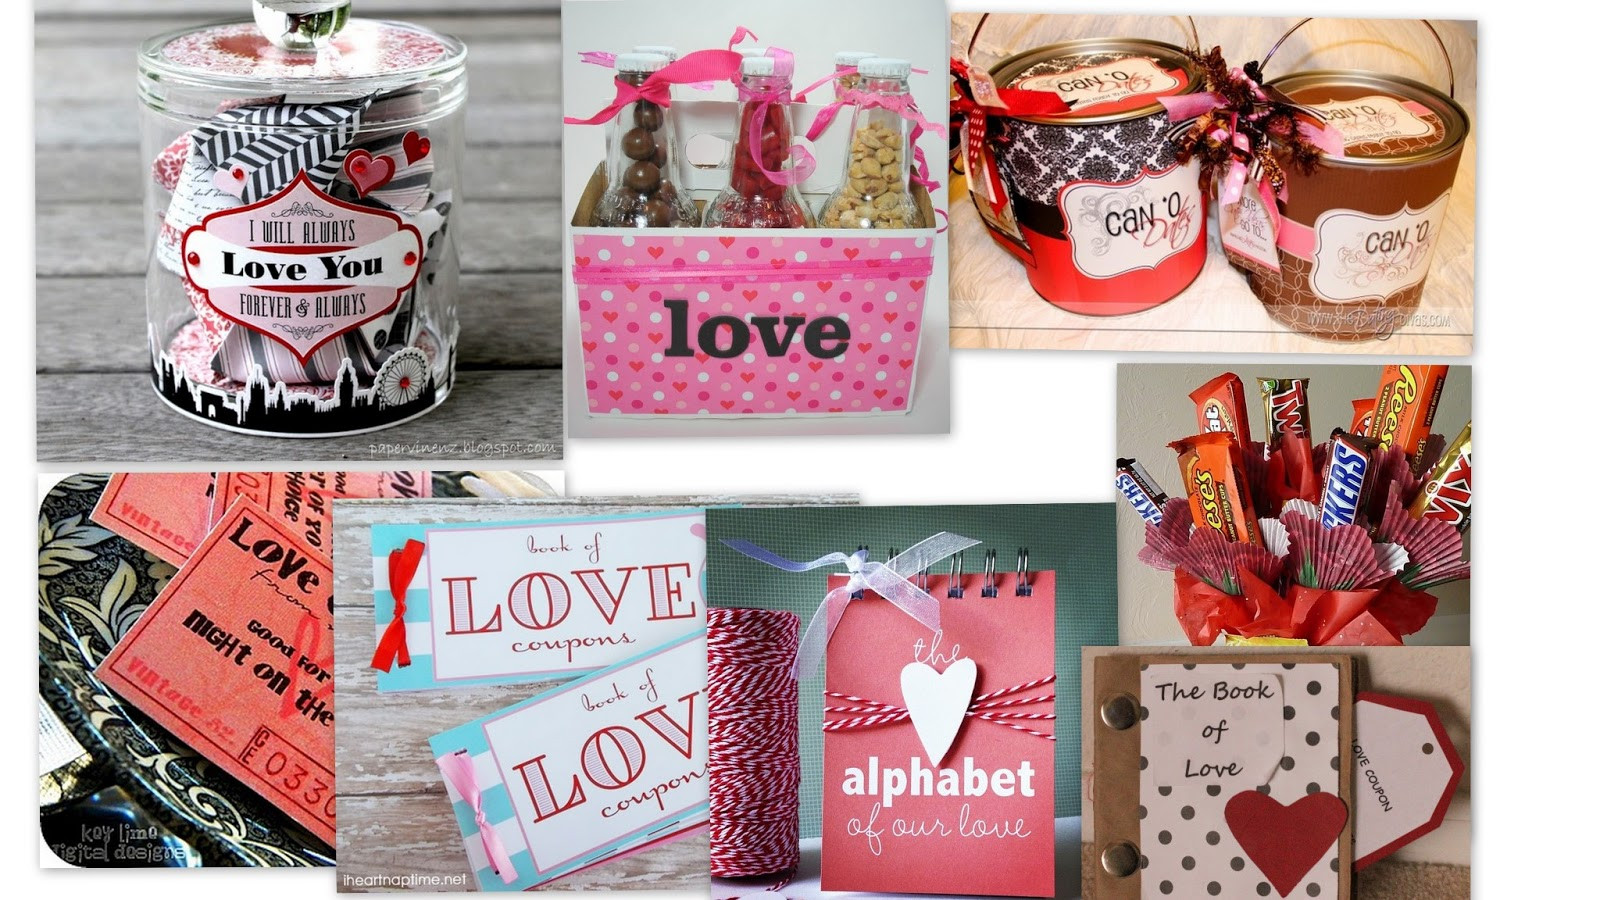 Best ideas about Pinterest Gift Ideas
. Save or Pin Easy Last Minute DIY Valentine s Gifts I Dig Pinterest Now.